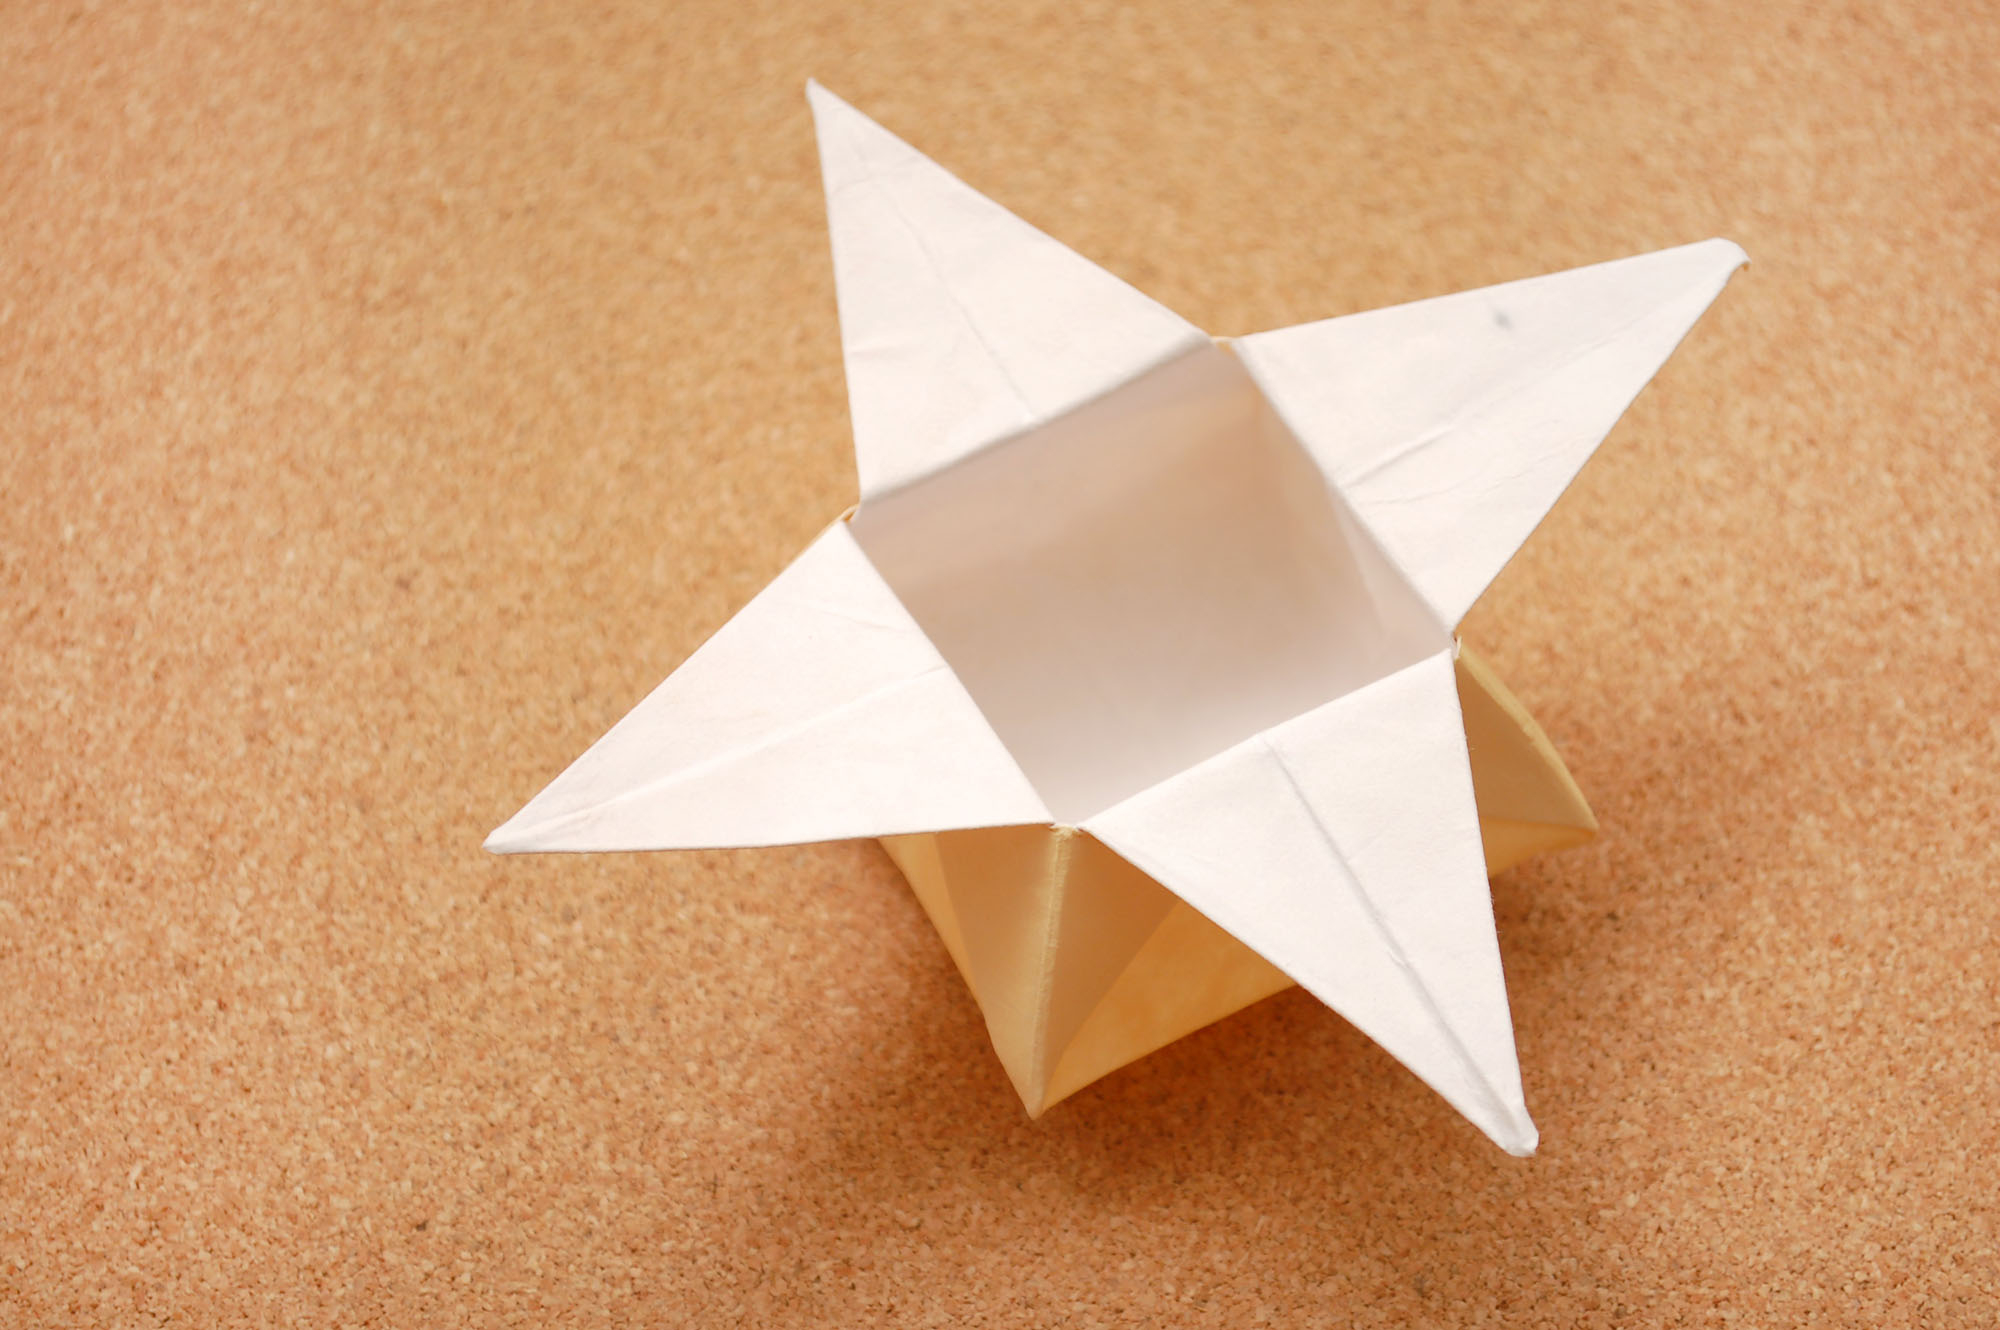 How To Make An Origami Star How To Make An Origami Star Box With Pictures Wikihow